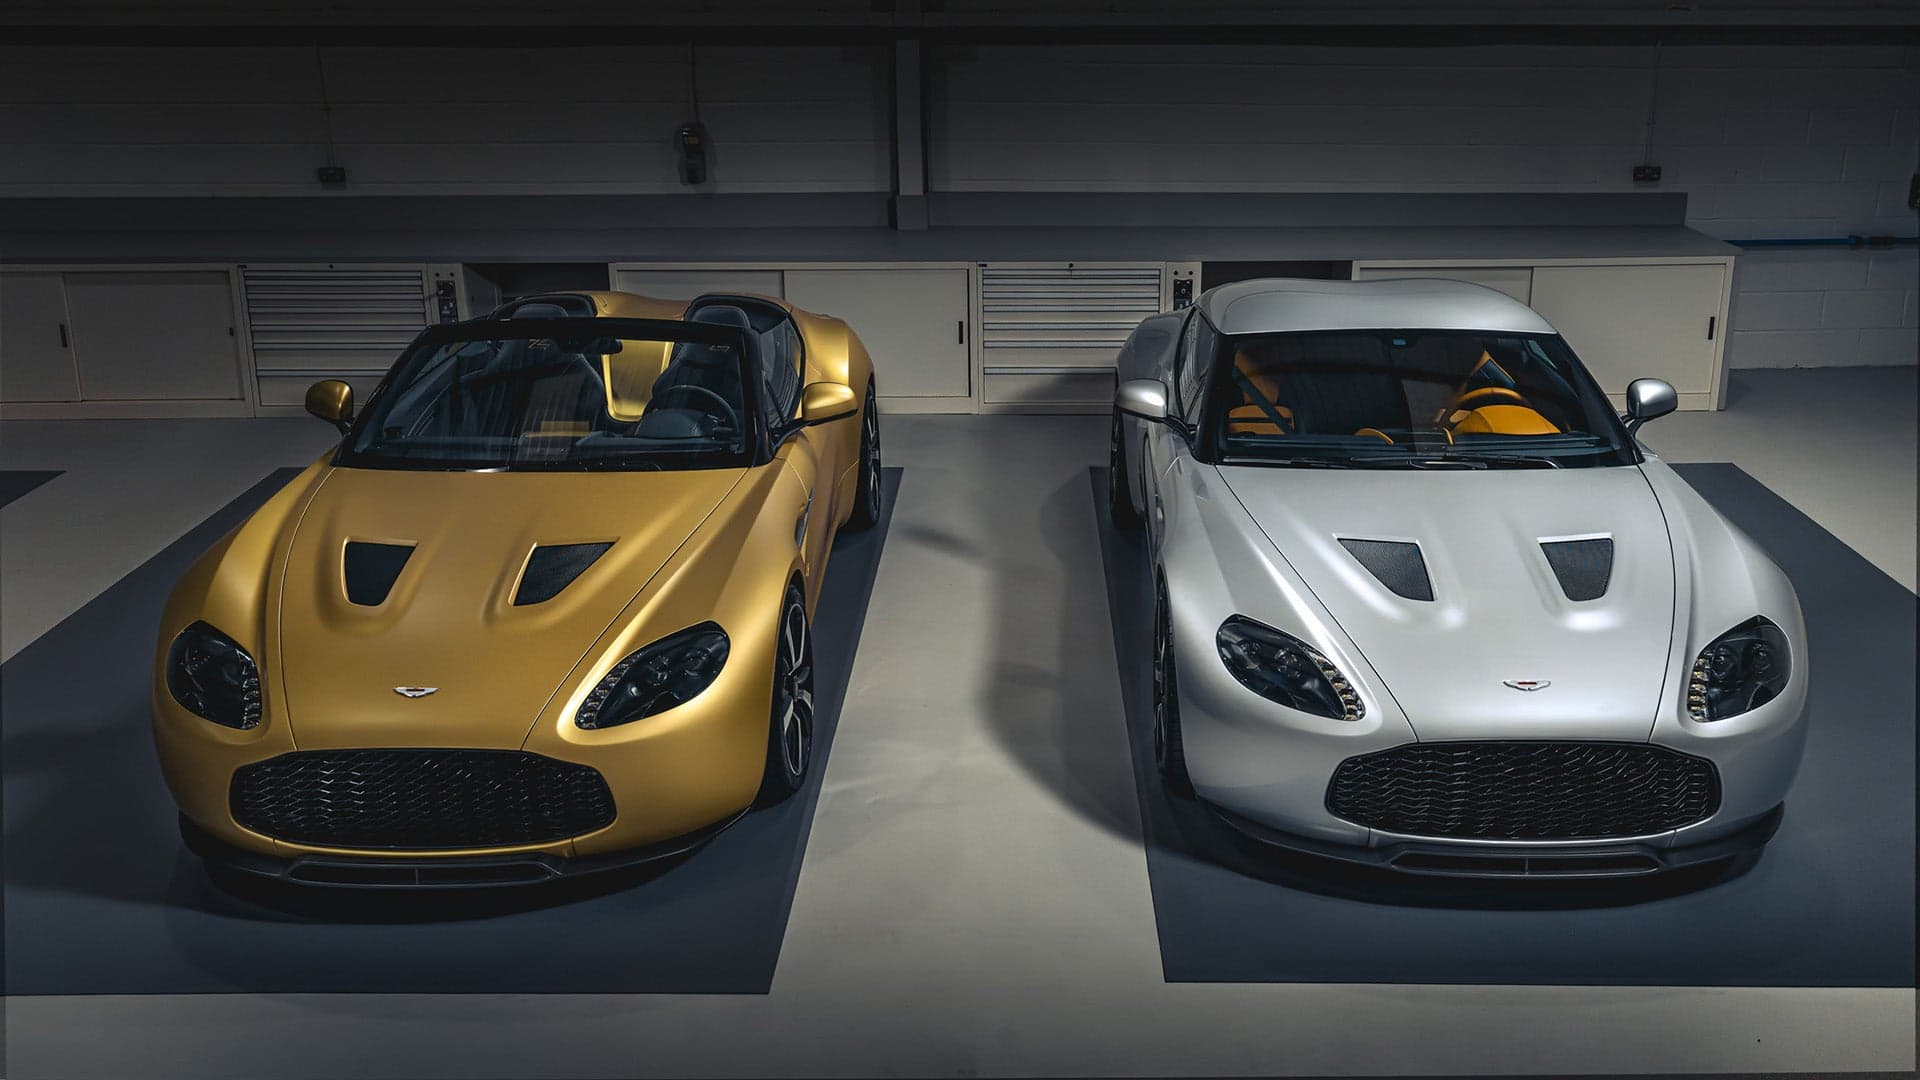 Meet the 600-HP Aston Martin V12 Zagato Heritage Twins by R-Reforged